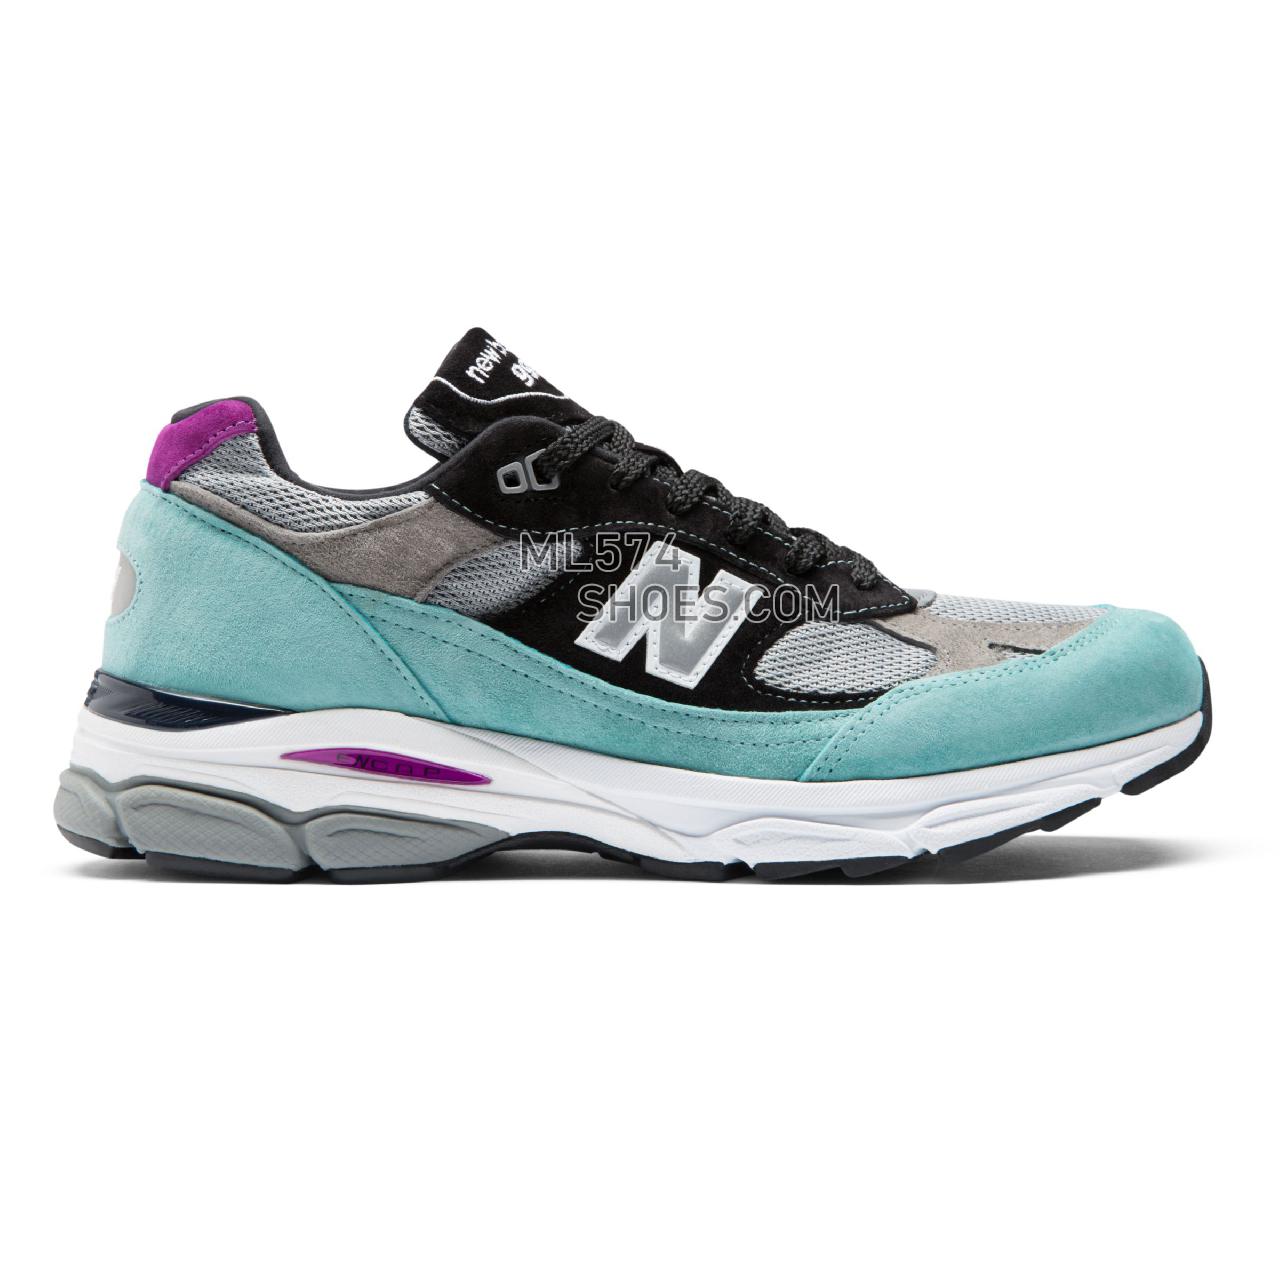 New Balance Made in UK 991.9 - Men's 991.9 Made in UK Classic M9919-PM - Light Tidepool with Grey and Black - M9919EC